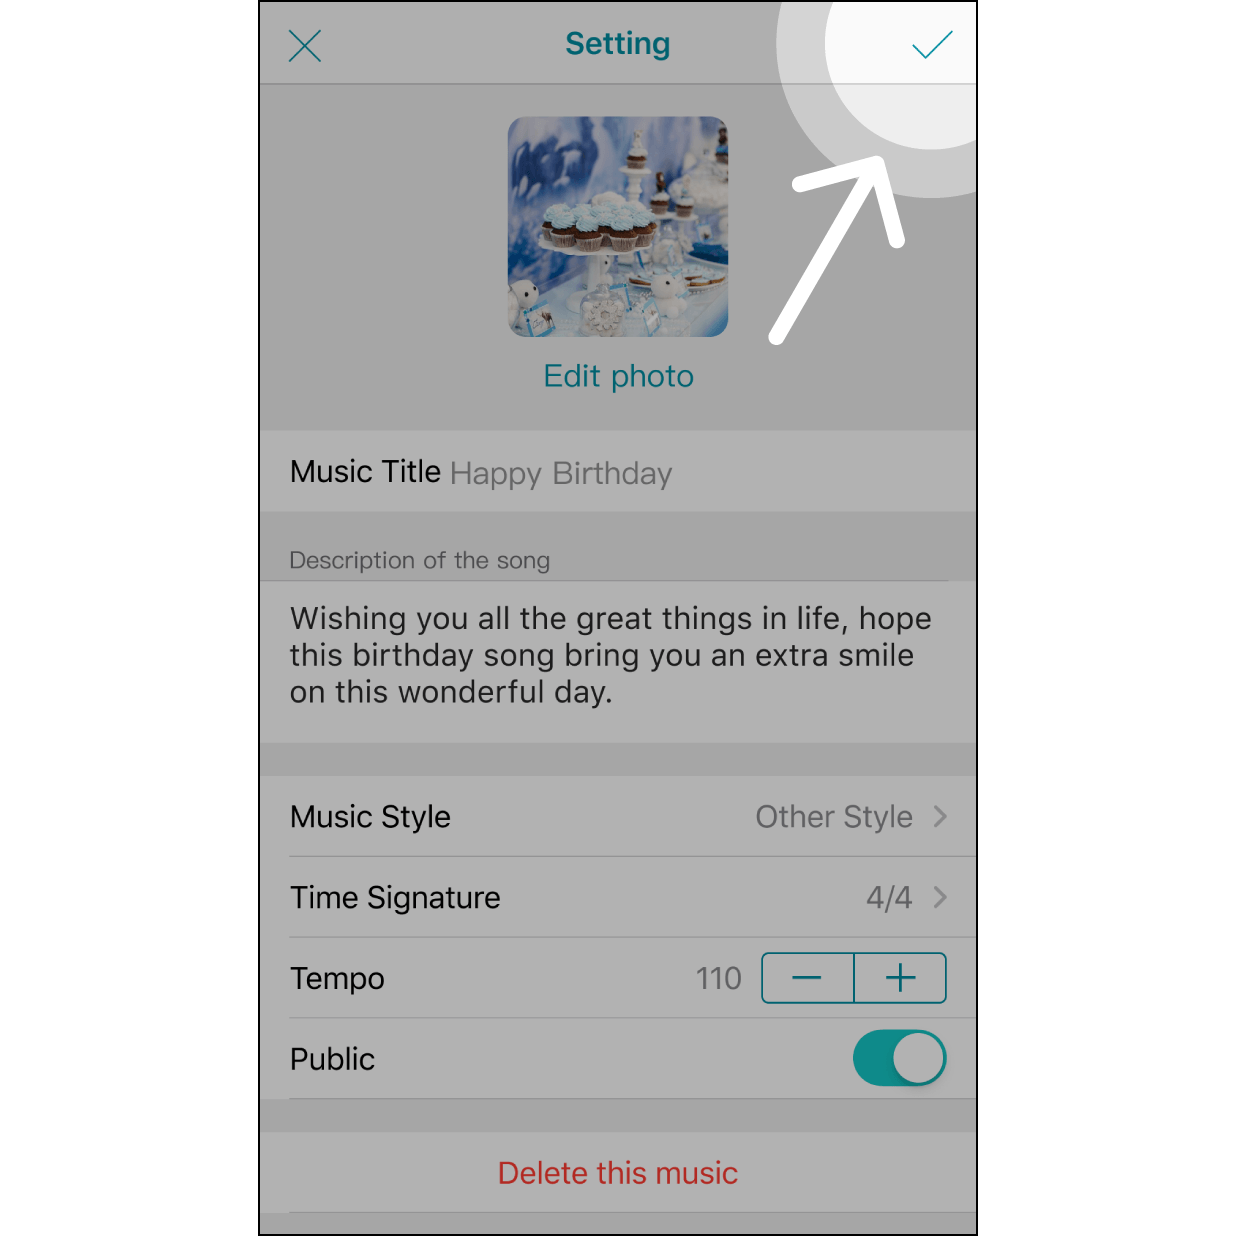 Select the photo and return, the photo will appear on the screen. Then click the check icon in the upper right corner to leave the settings.